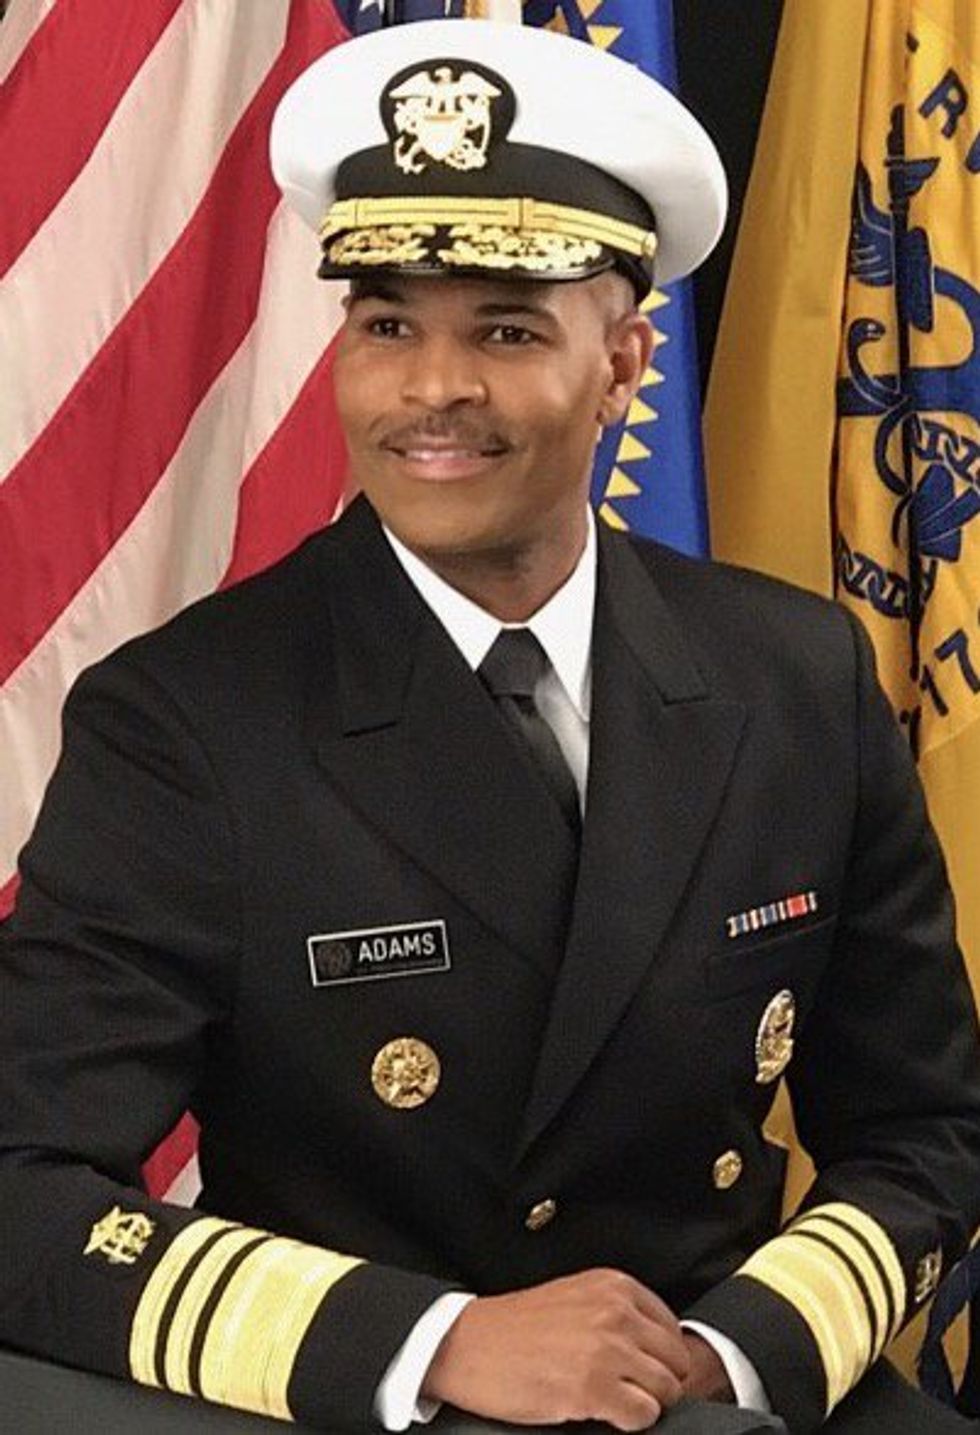 Nobody Told Us The Surgeon General Was SO EFFING HOT